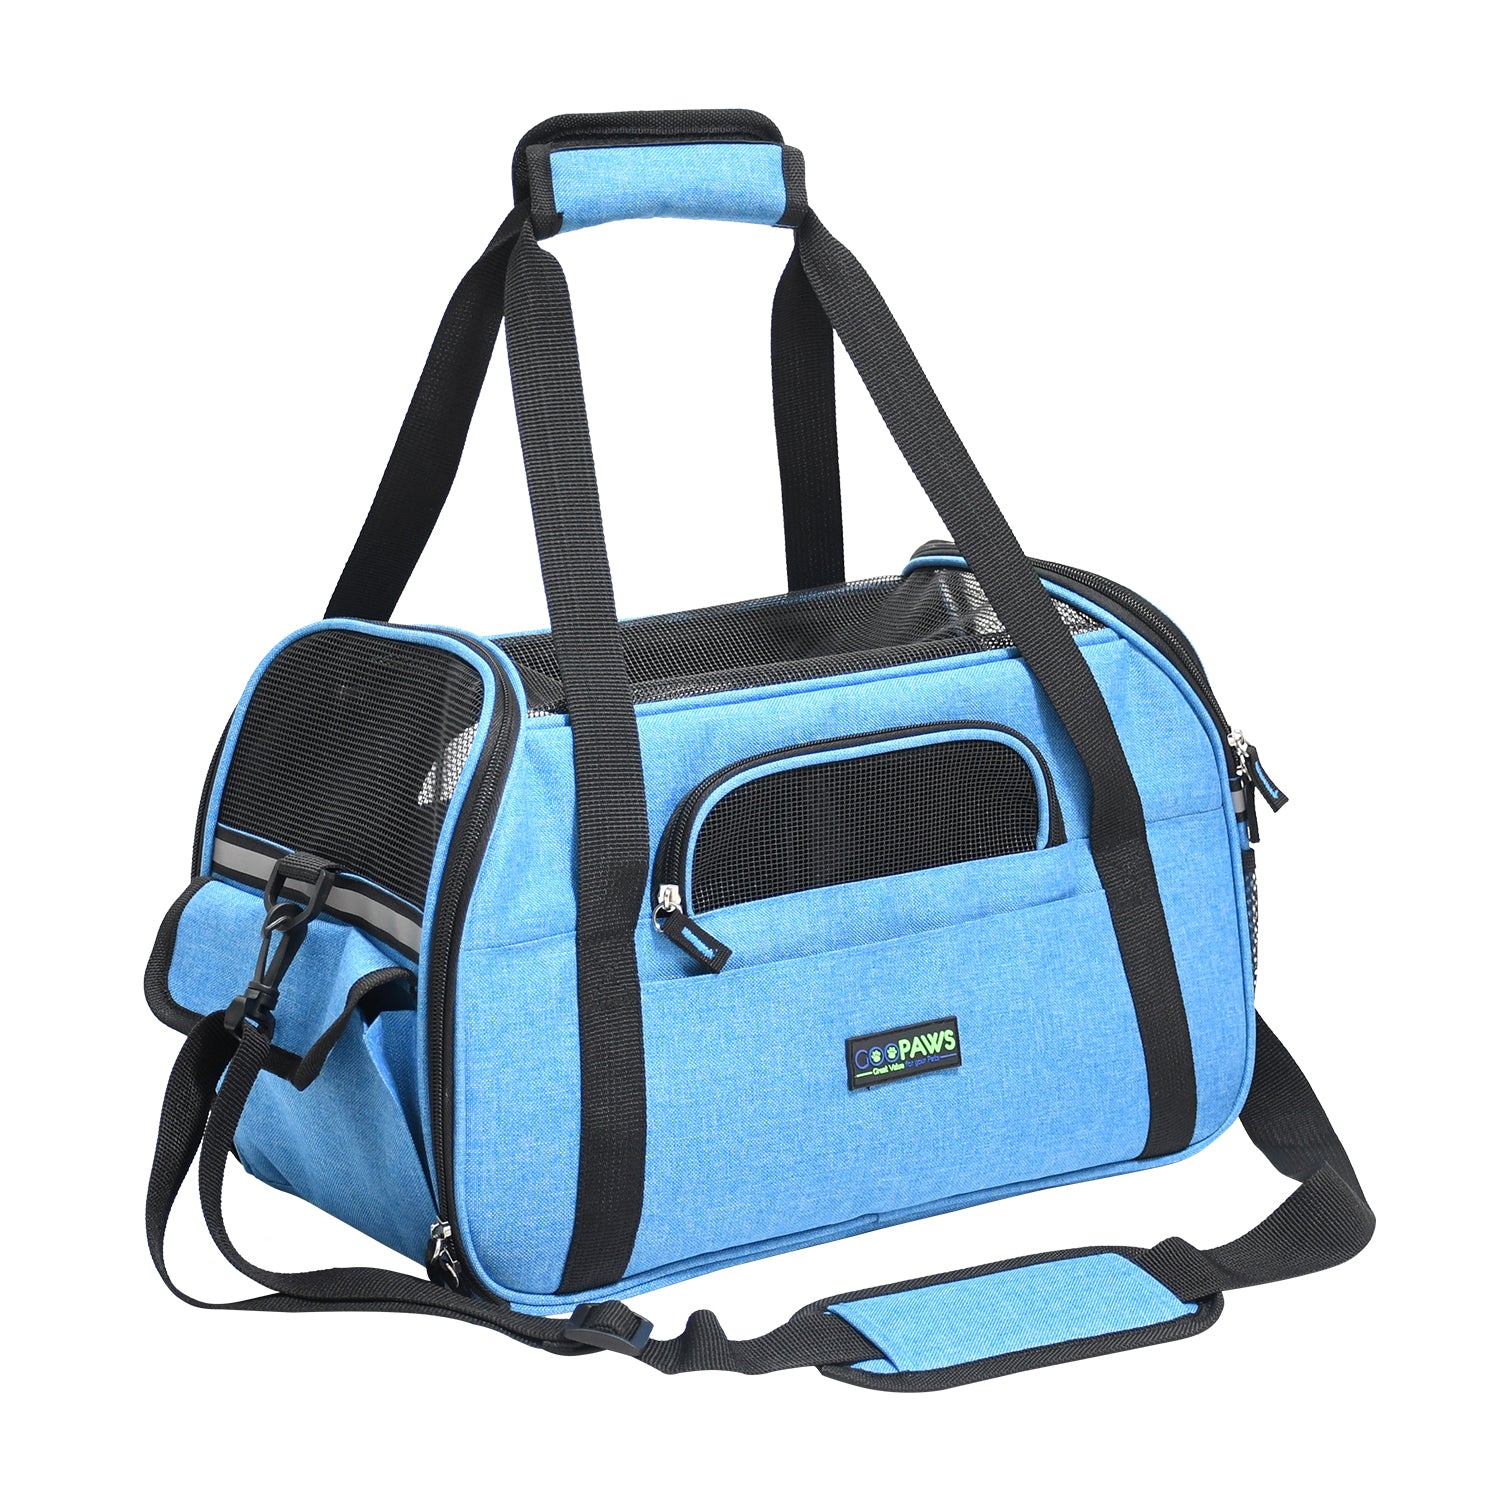 GOOPAWS Soft Sided Pet Cat Carrier Perfect for Travel, Turquoise, 19"